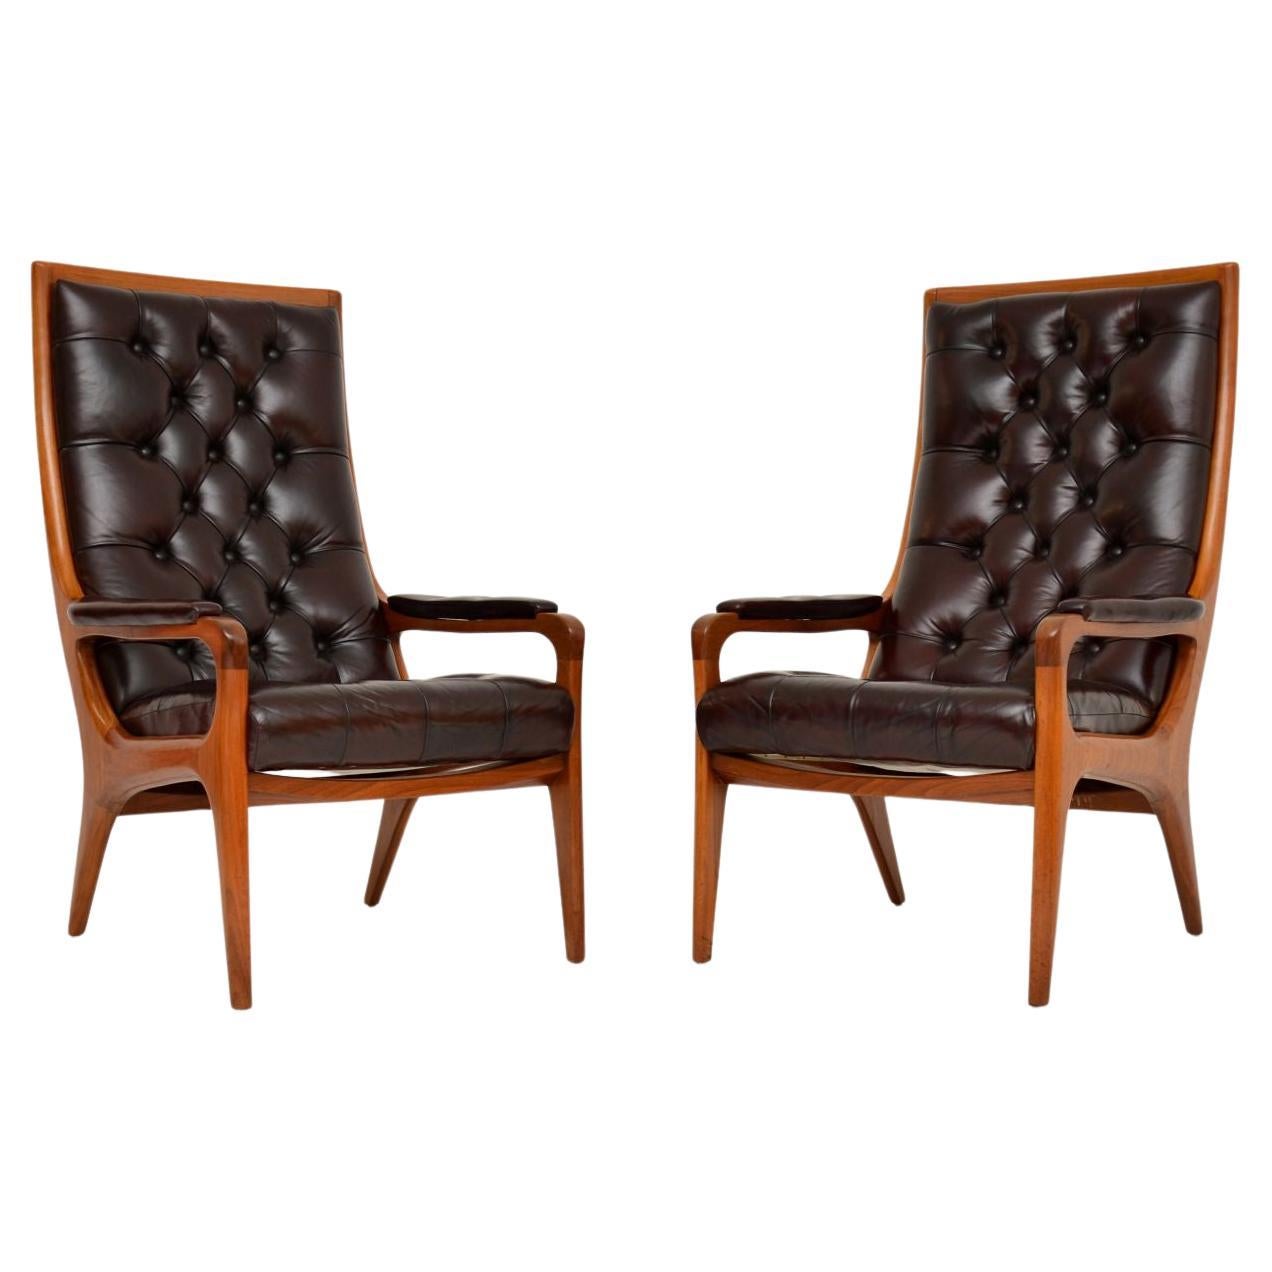 1960’s Pair of Vintage Walnut & Leather Armchairs by Howard Keith For Sale